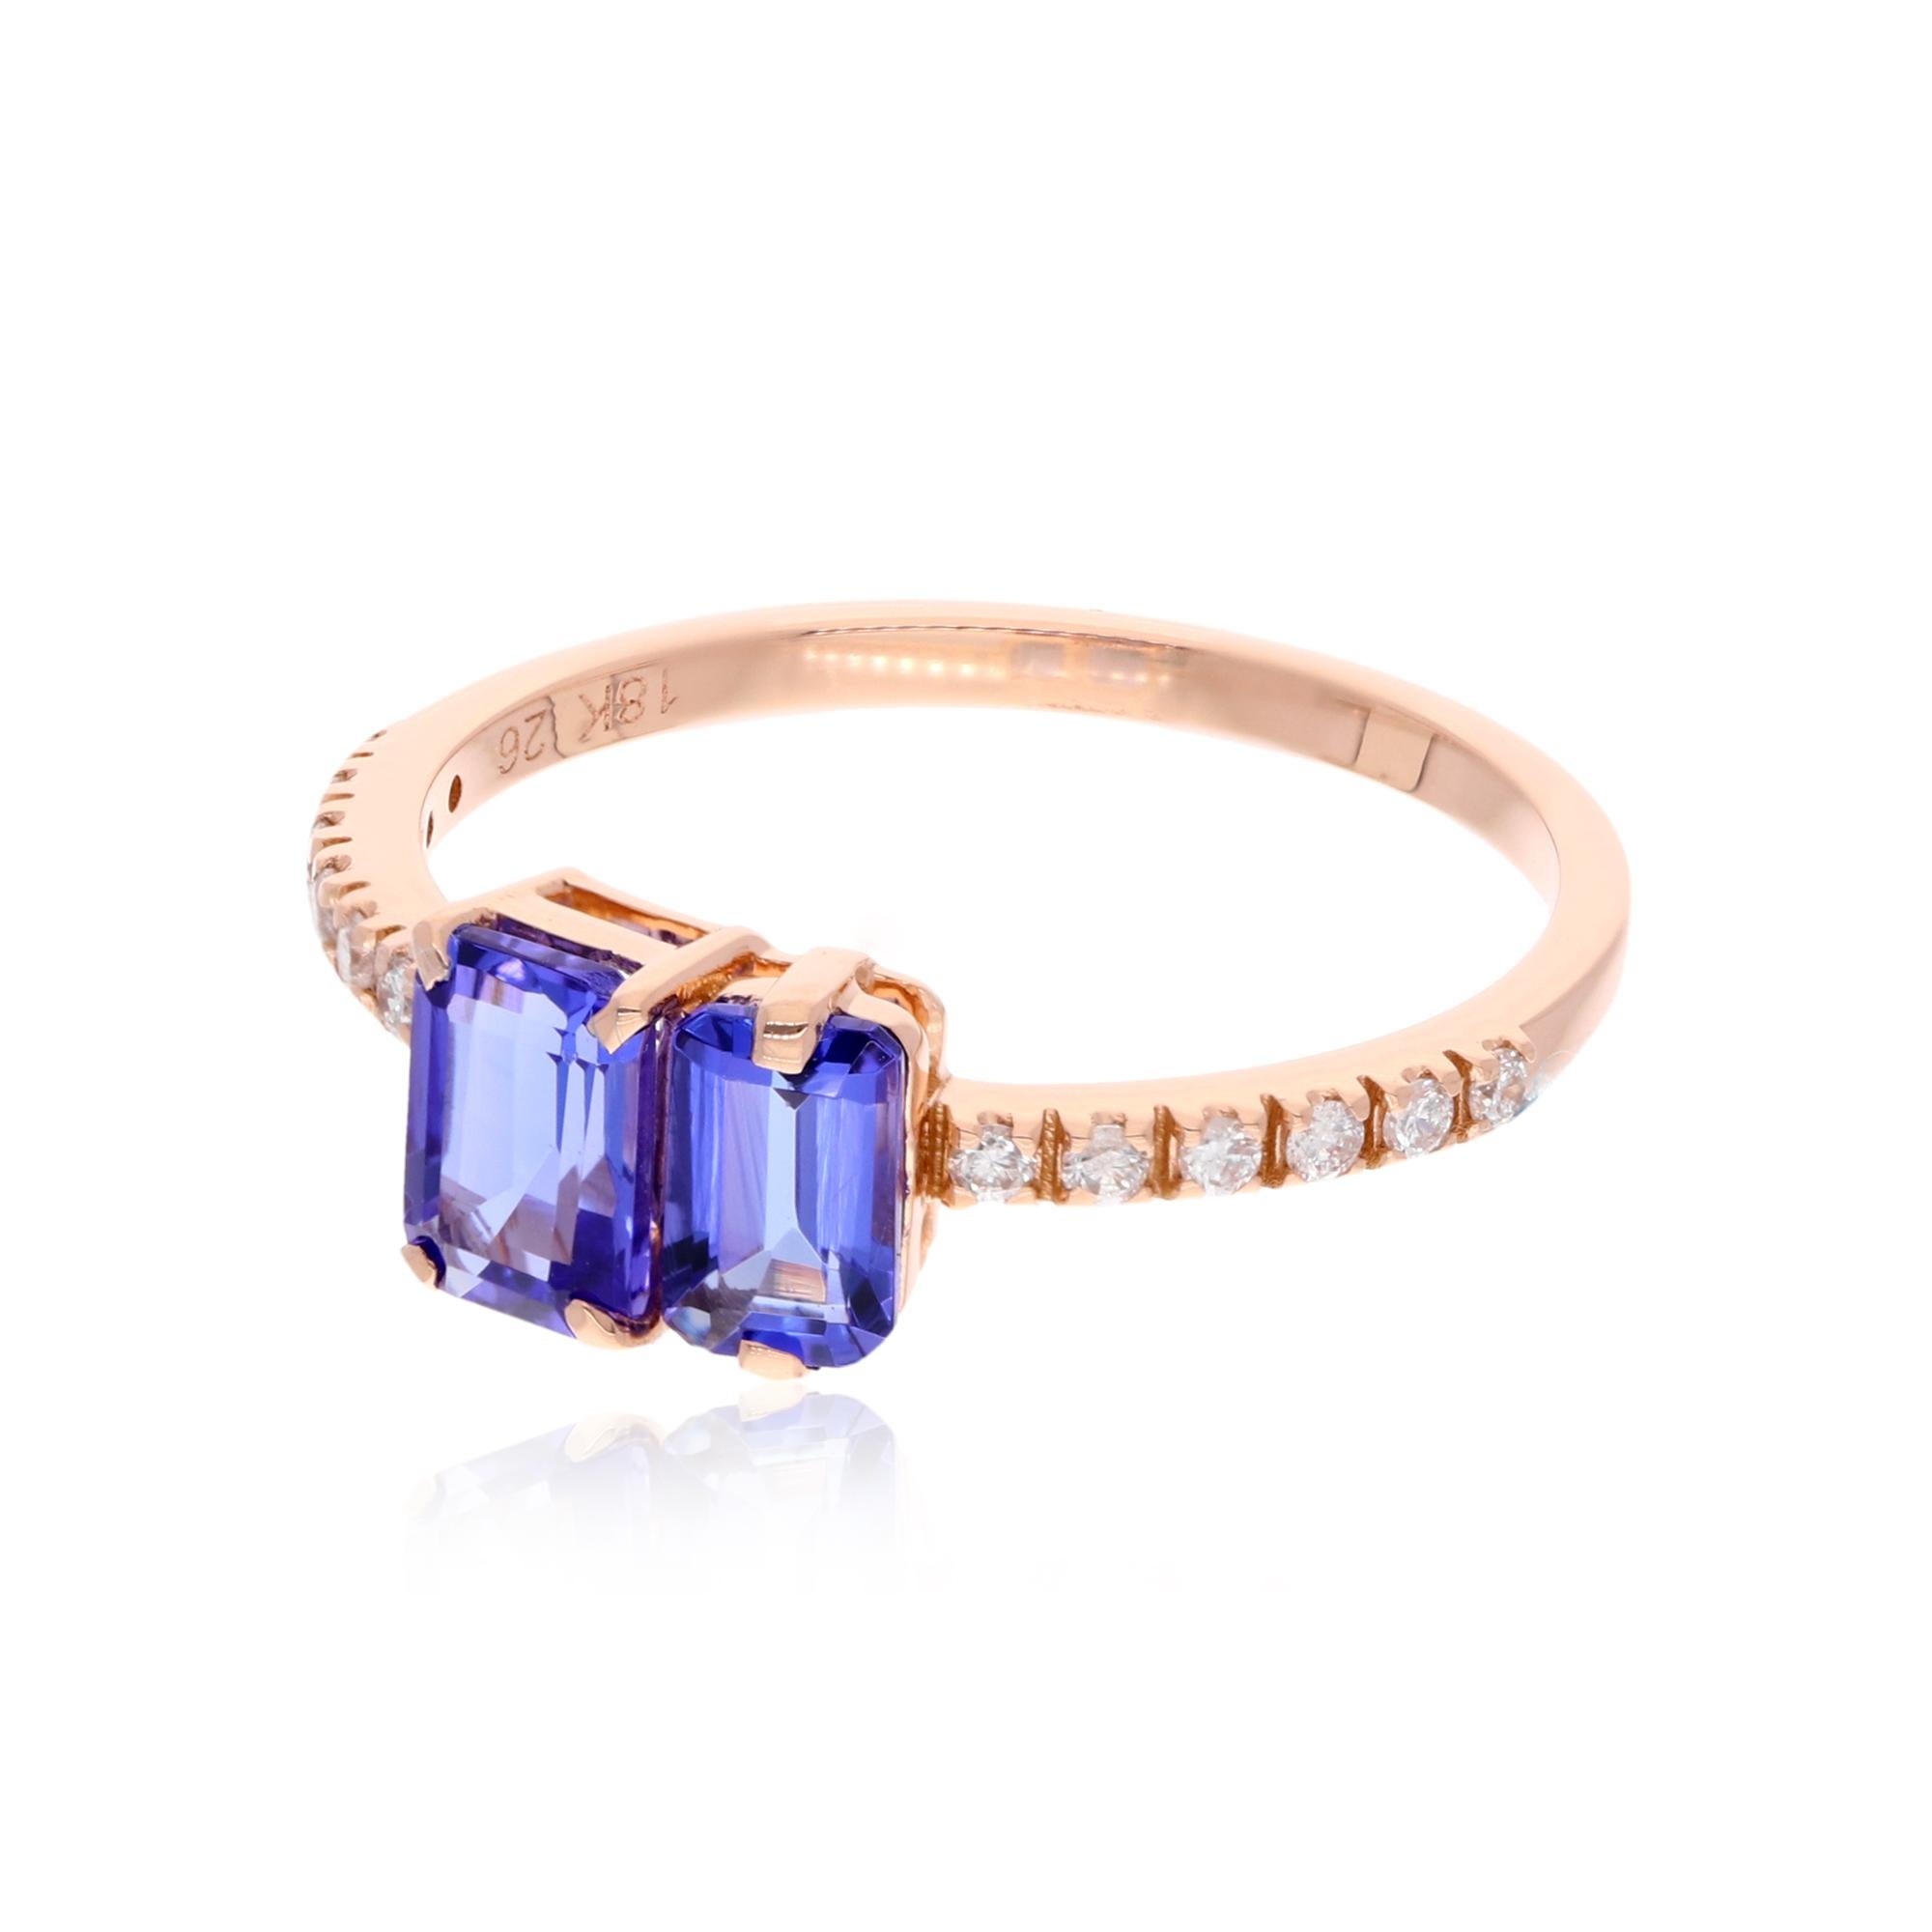 Item Code :- SER-22358
Gross Wt. :- 2.18 gm
18k Rose Gold Weight :- 1.93 gram
Diamond Weight :- 0.11 Carat
Tanzanite Weight :- 1.12 Carat
Ring Size :- 7 US & All size available

✦ Sizing
.....................
We can adjust most items to fit your